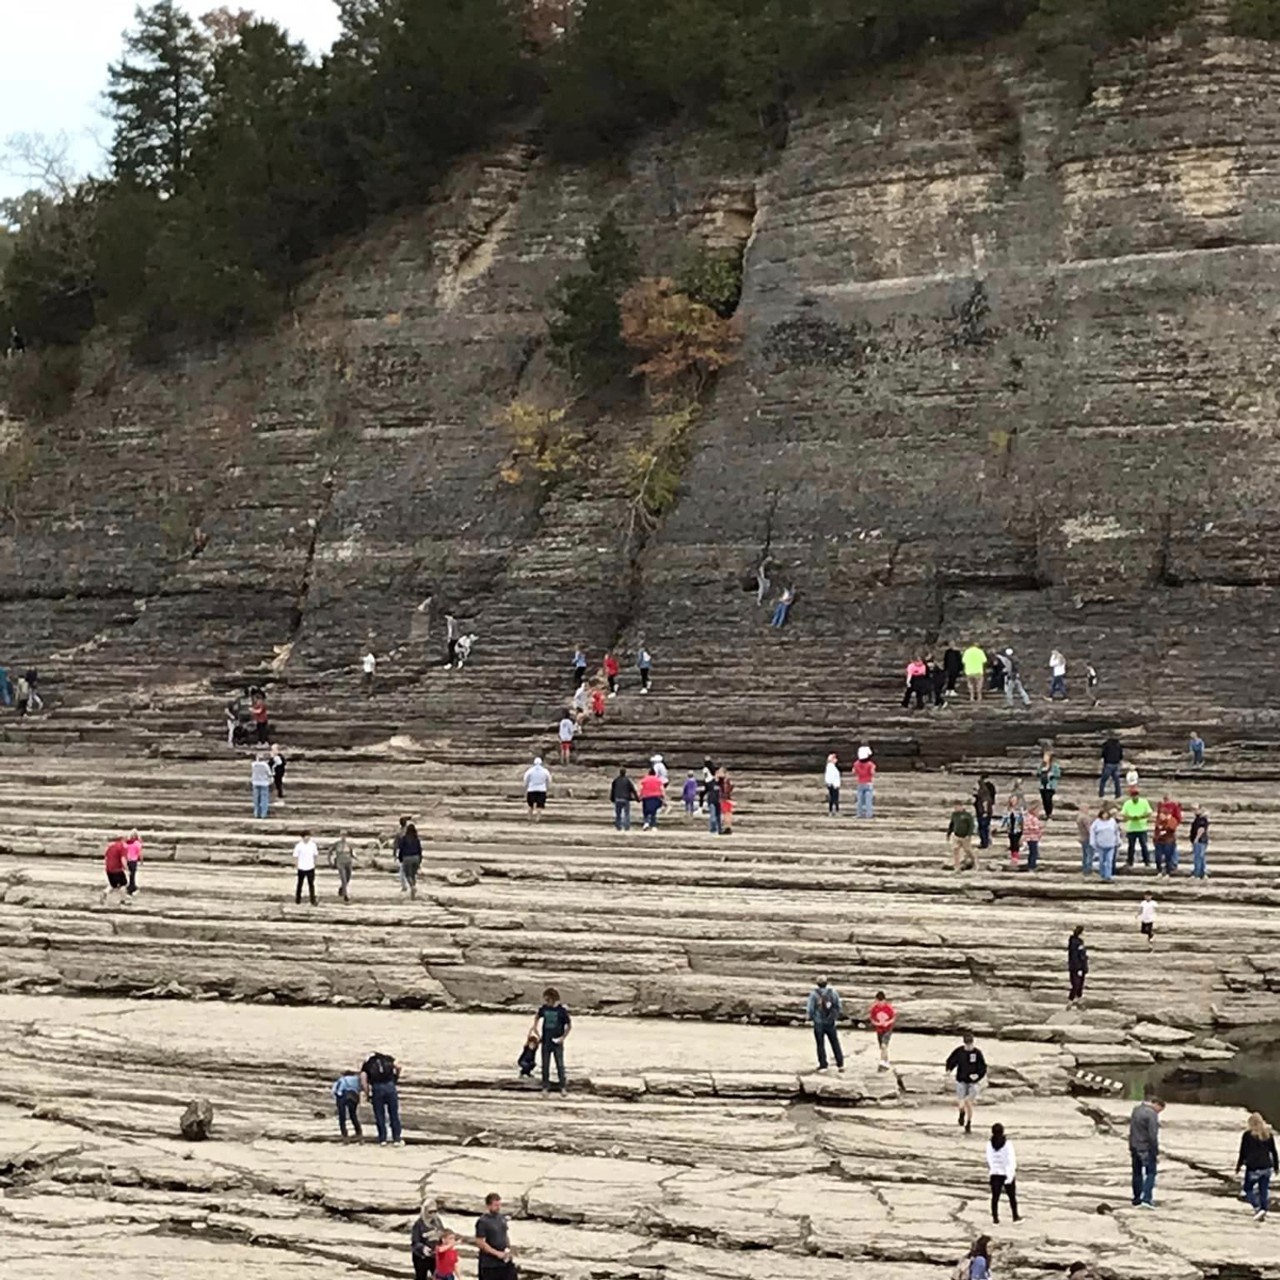 You Can Now Walk To Tower Rock in the Middle of the Mississippi River [PHOTOS]